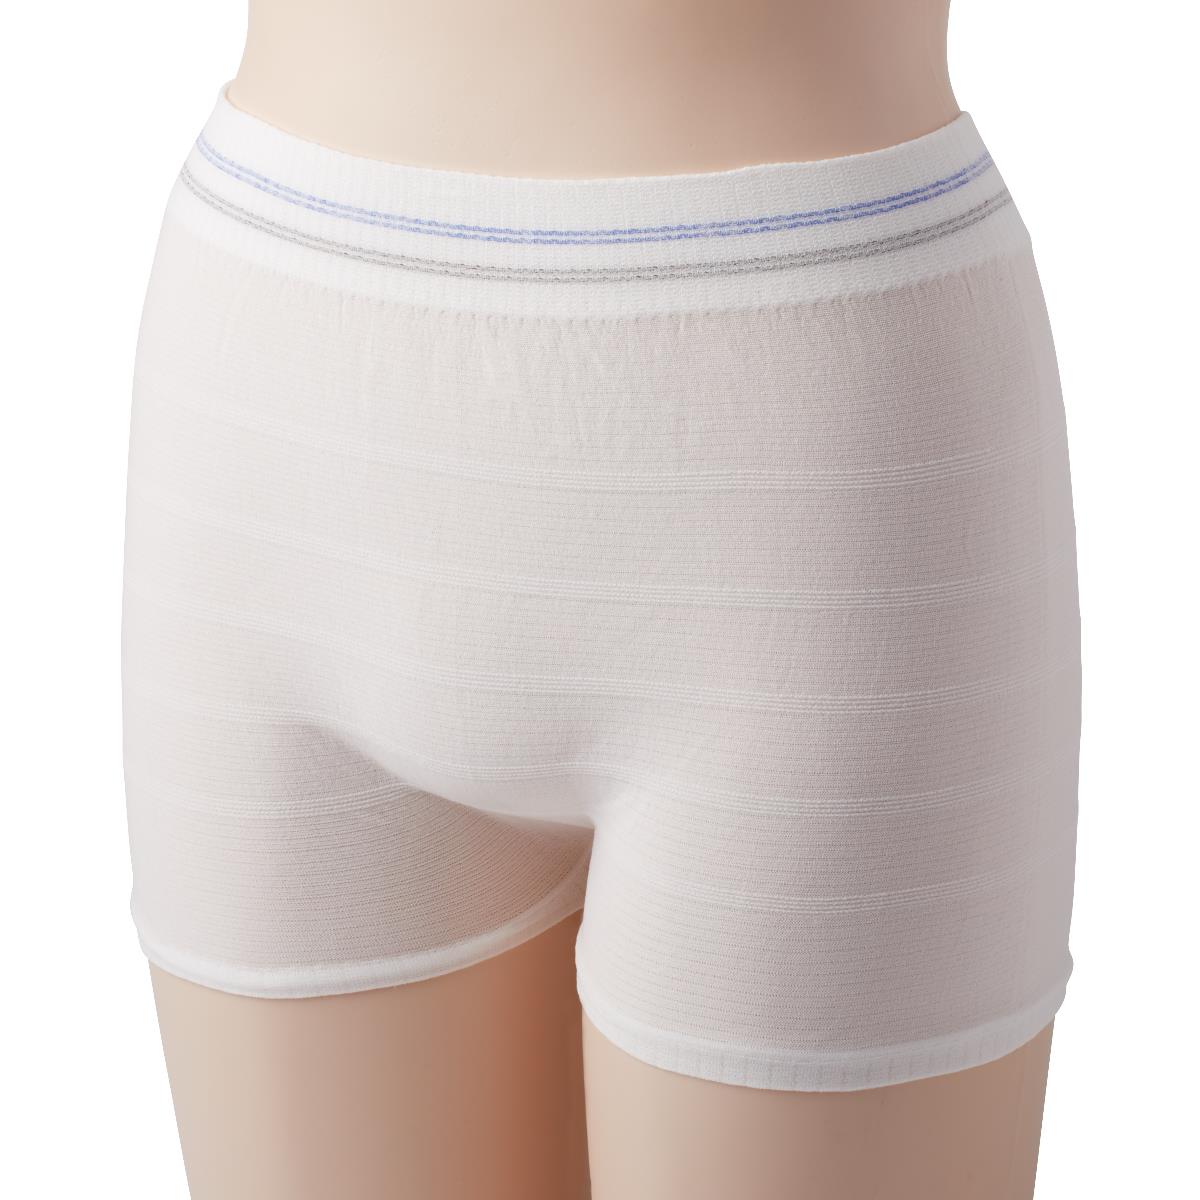  Knit Mesh Surgical Pants [5 Pack] Disposable Underwear